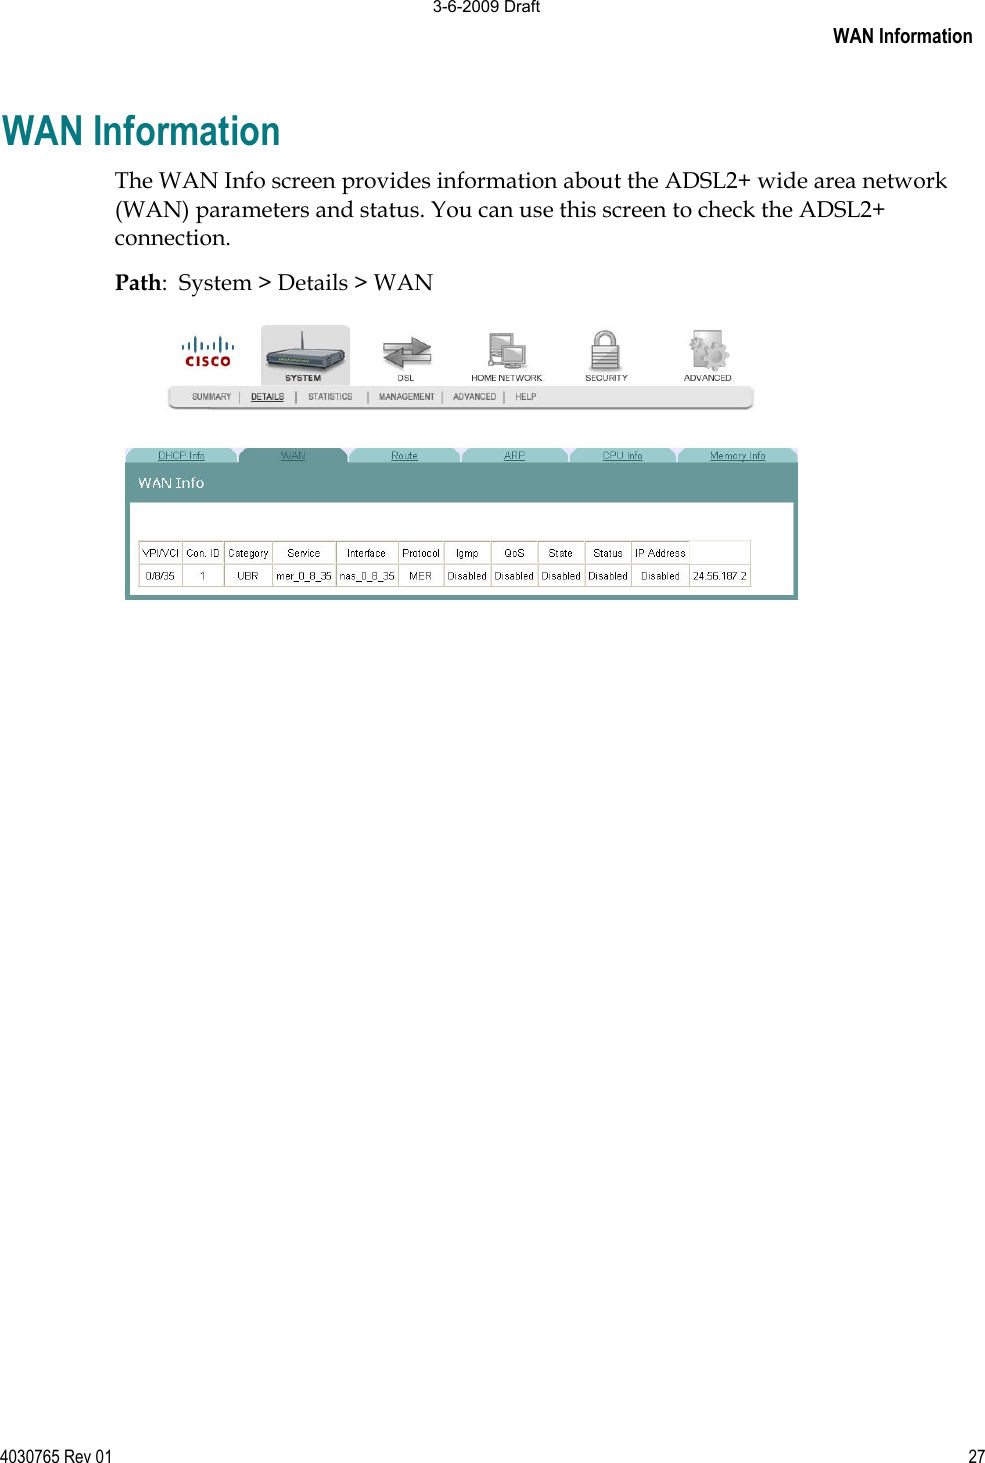 WAN Information 4030765 Rev 01 27WAN Information The WAN Info screen provides information about the ADSL2+ wide area network (WAN) parameters and status. You can use this screen to check the ADSL2+ connection. Path:  System &gt; Details &gt; WAN 3-6-2009 Draft